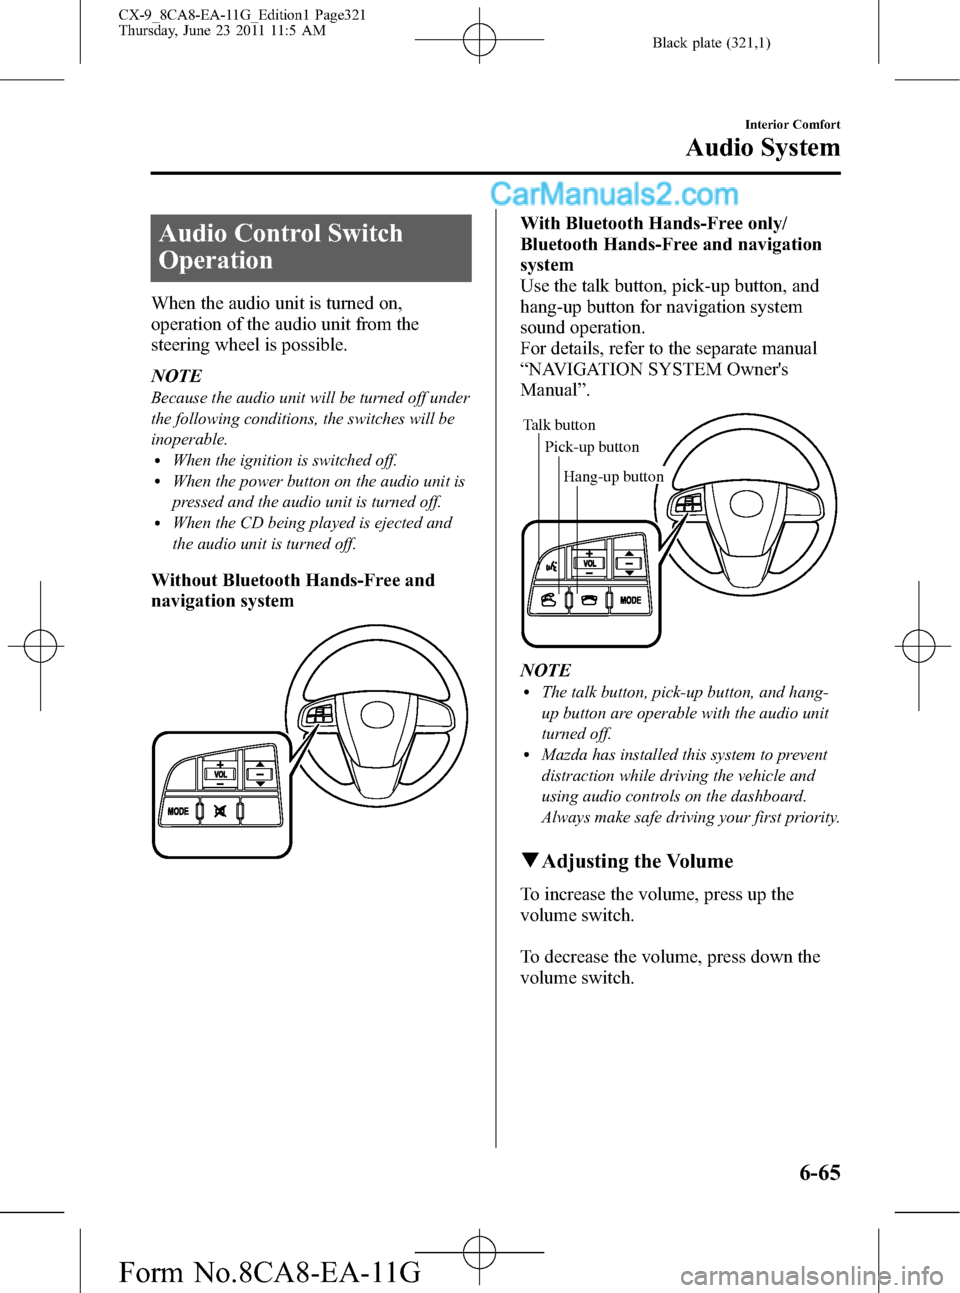 MAZDA MODEL CX-9 2012  Owners Manual (in English) Black plate (321,1)
Audio Control Switch
Operation
When the audio unit is turned on,
operation of the audio unit from the
steering wheel is possible.
NOTE
Because the audio unit will be turned off und